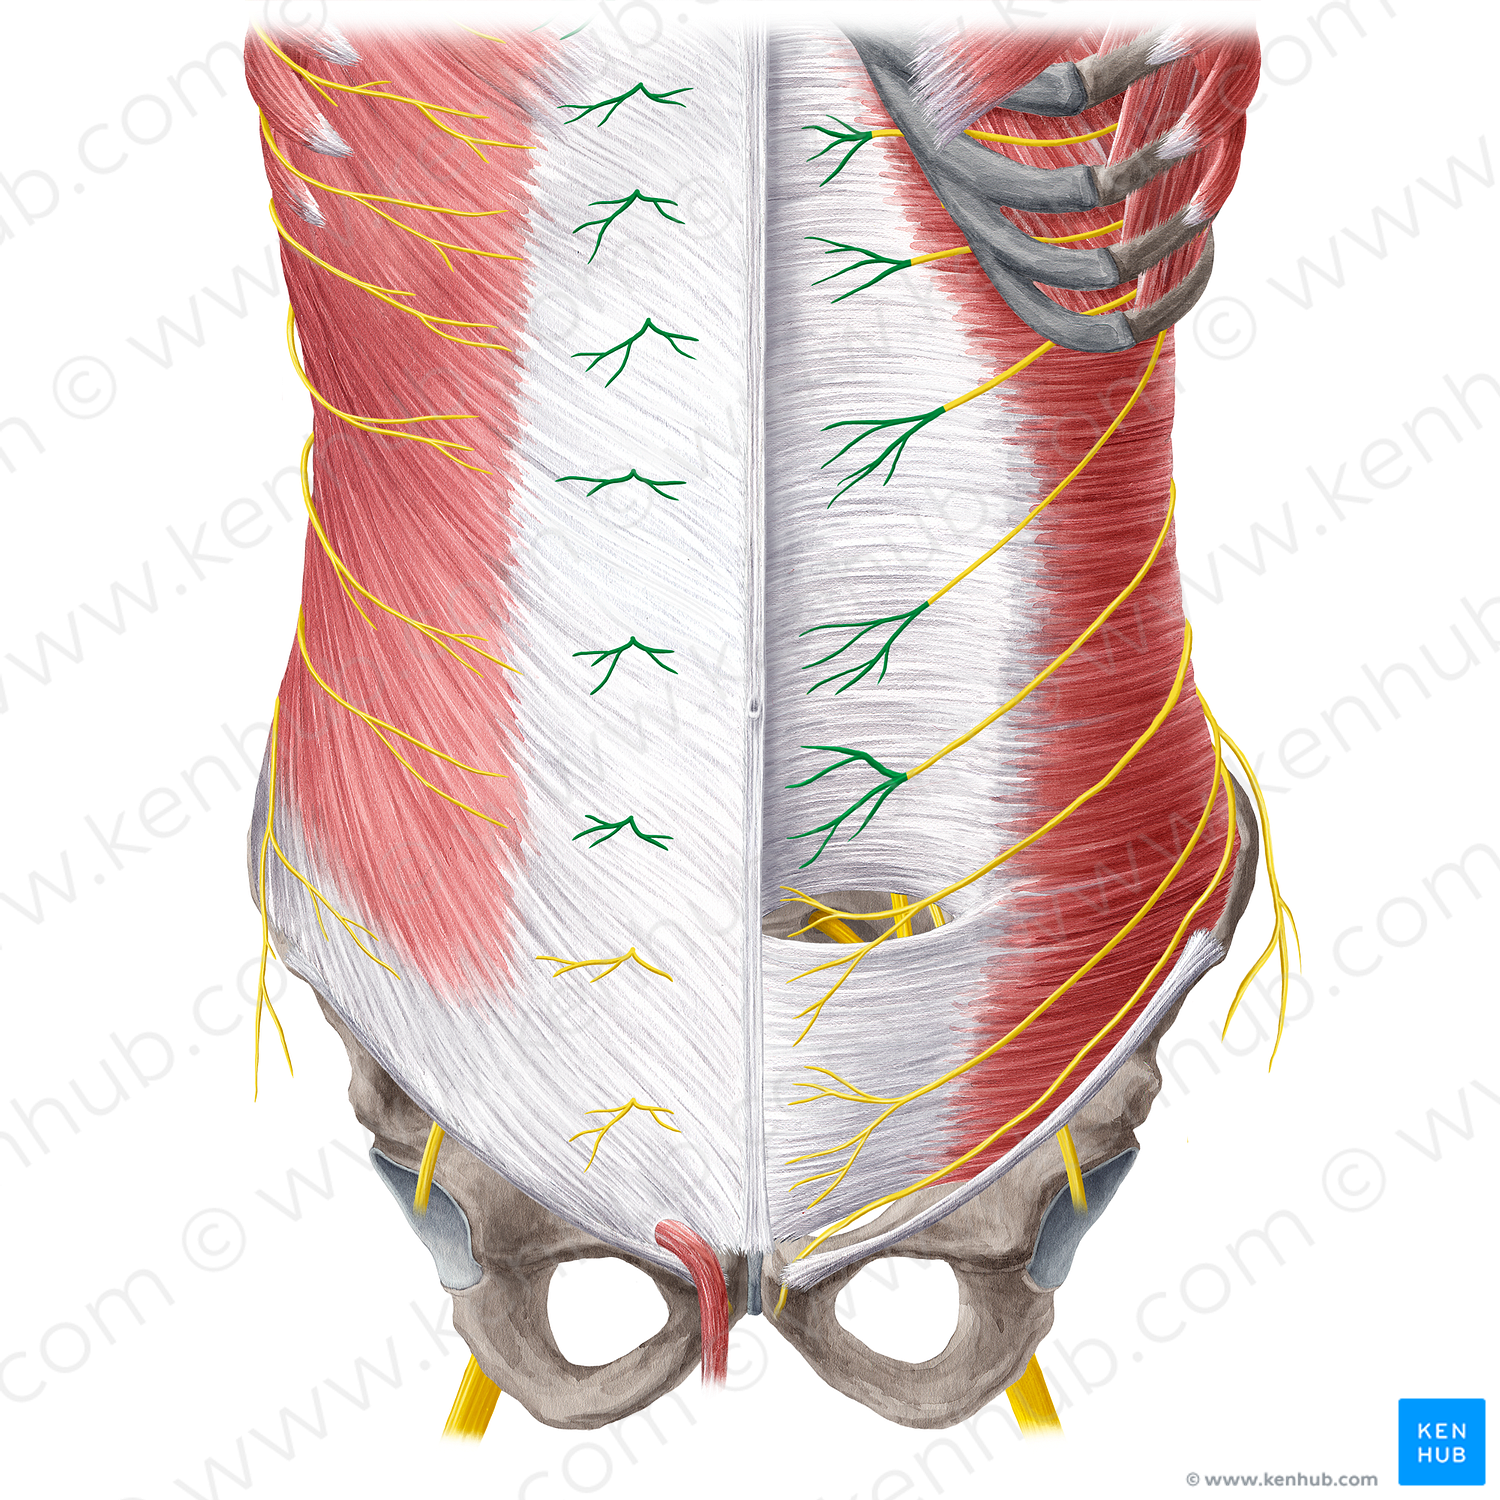 Anterior cutaneous branch of intercostal nerve (#21566)